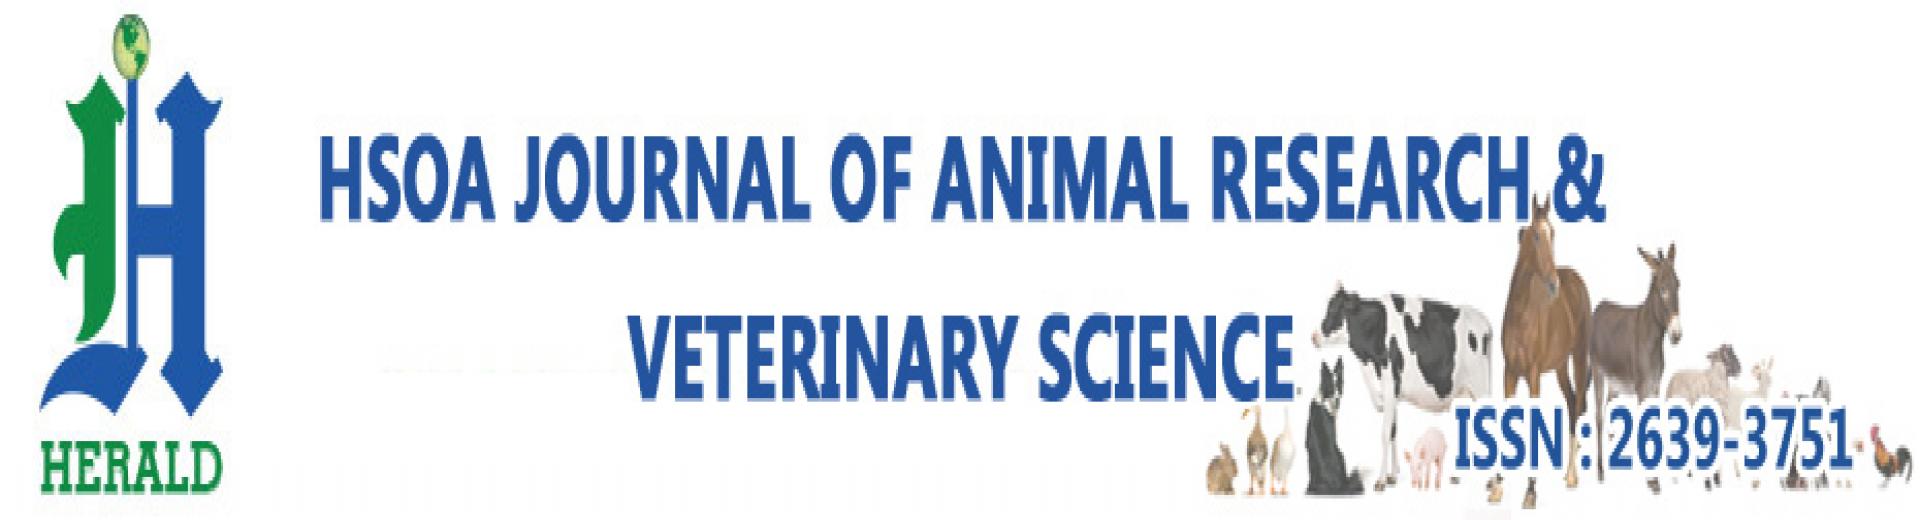 Archives | Journal of Animal Research & Veterinary Science